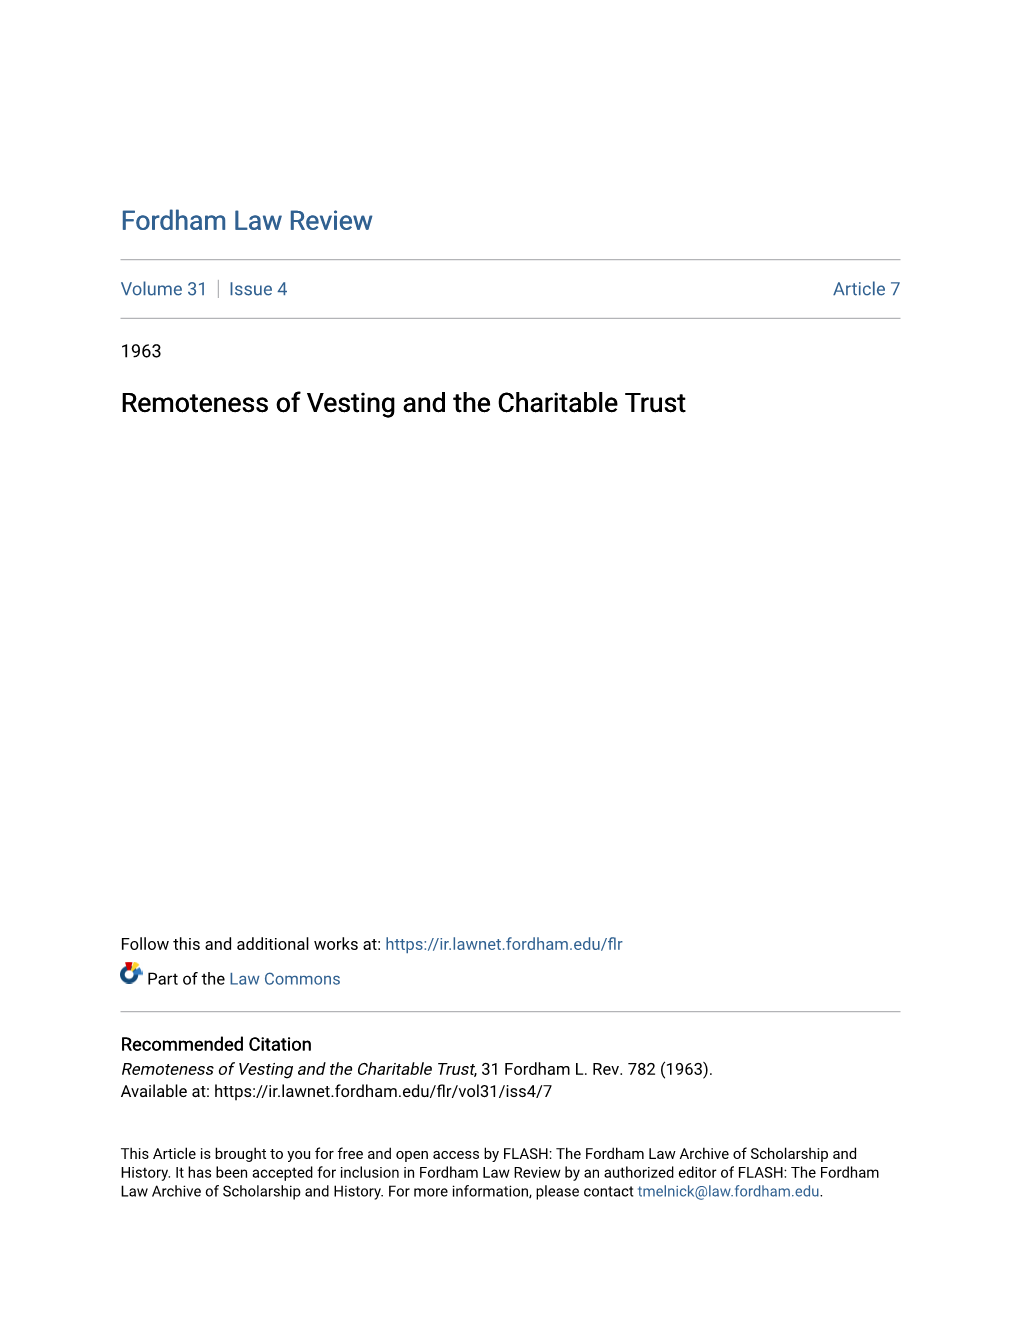 Remoteness of Vesting and the Charitable Trust